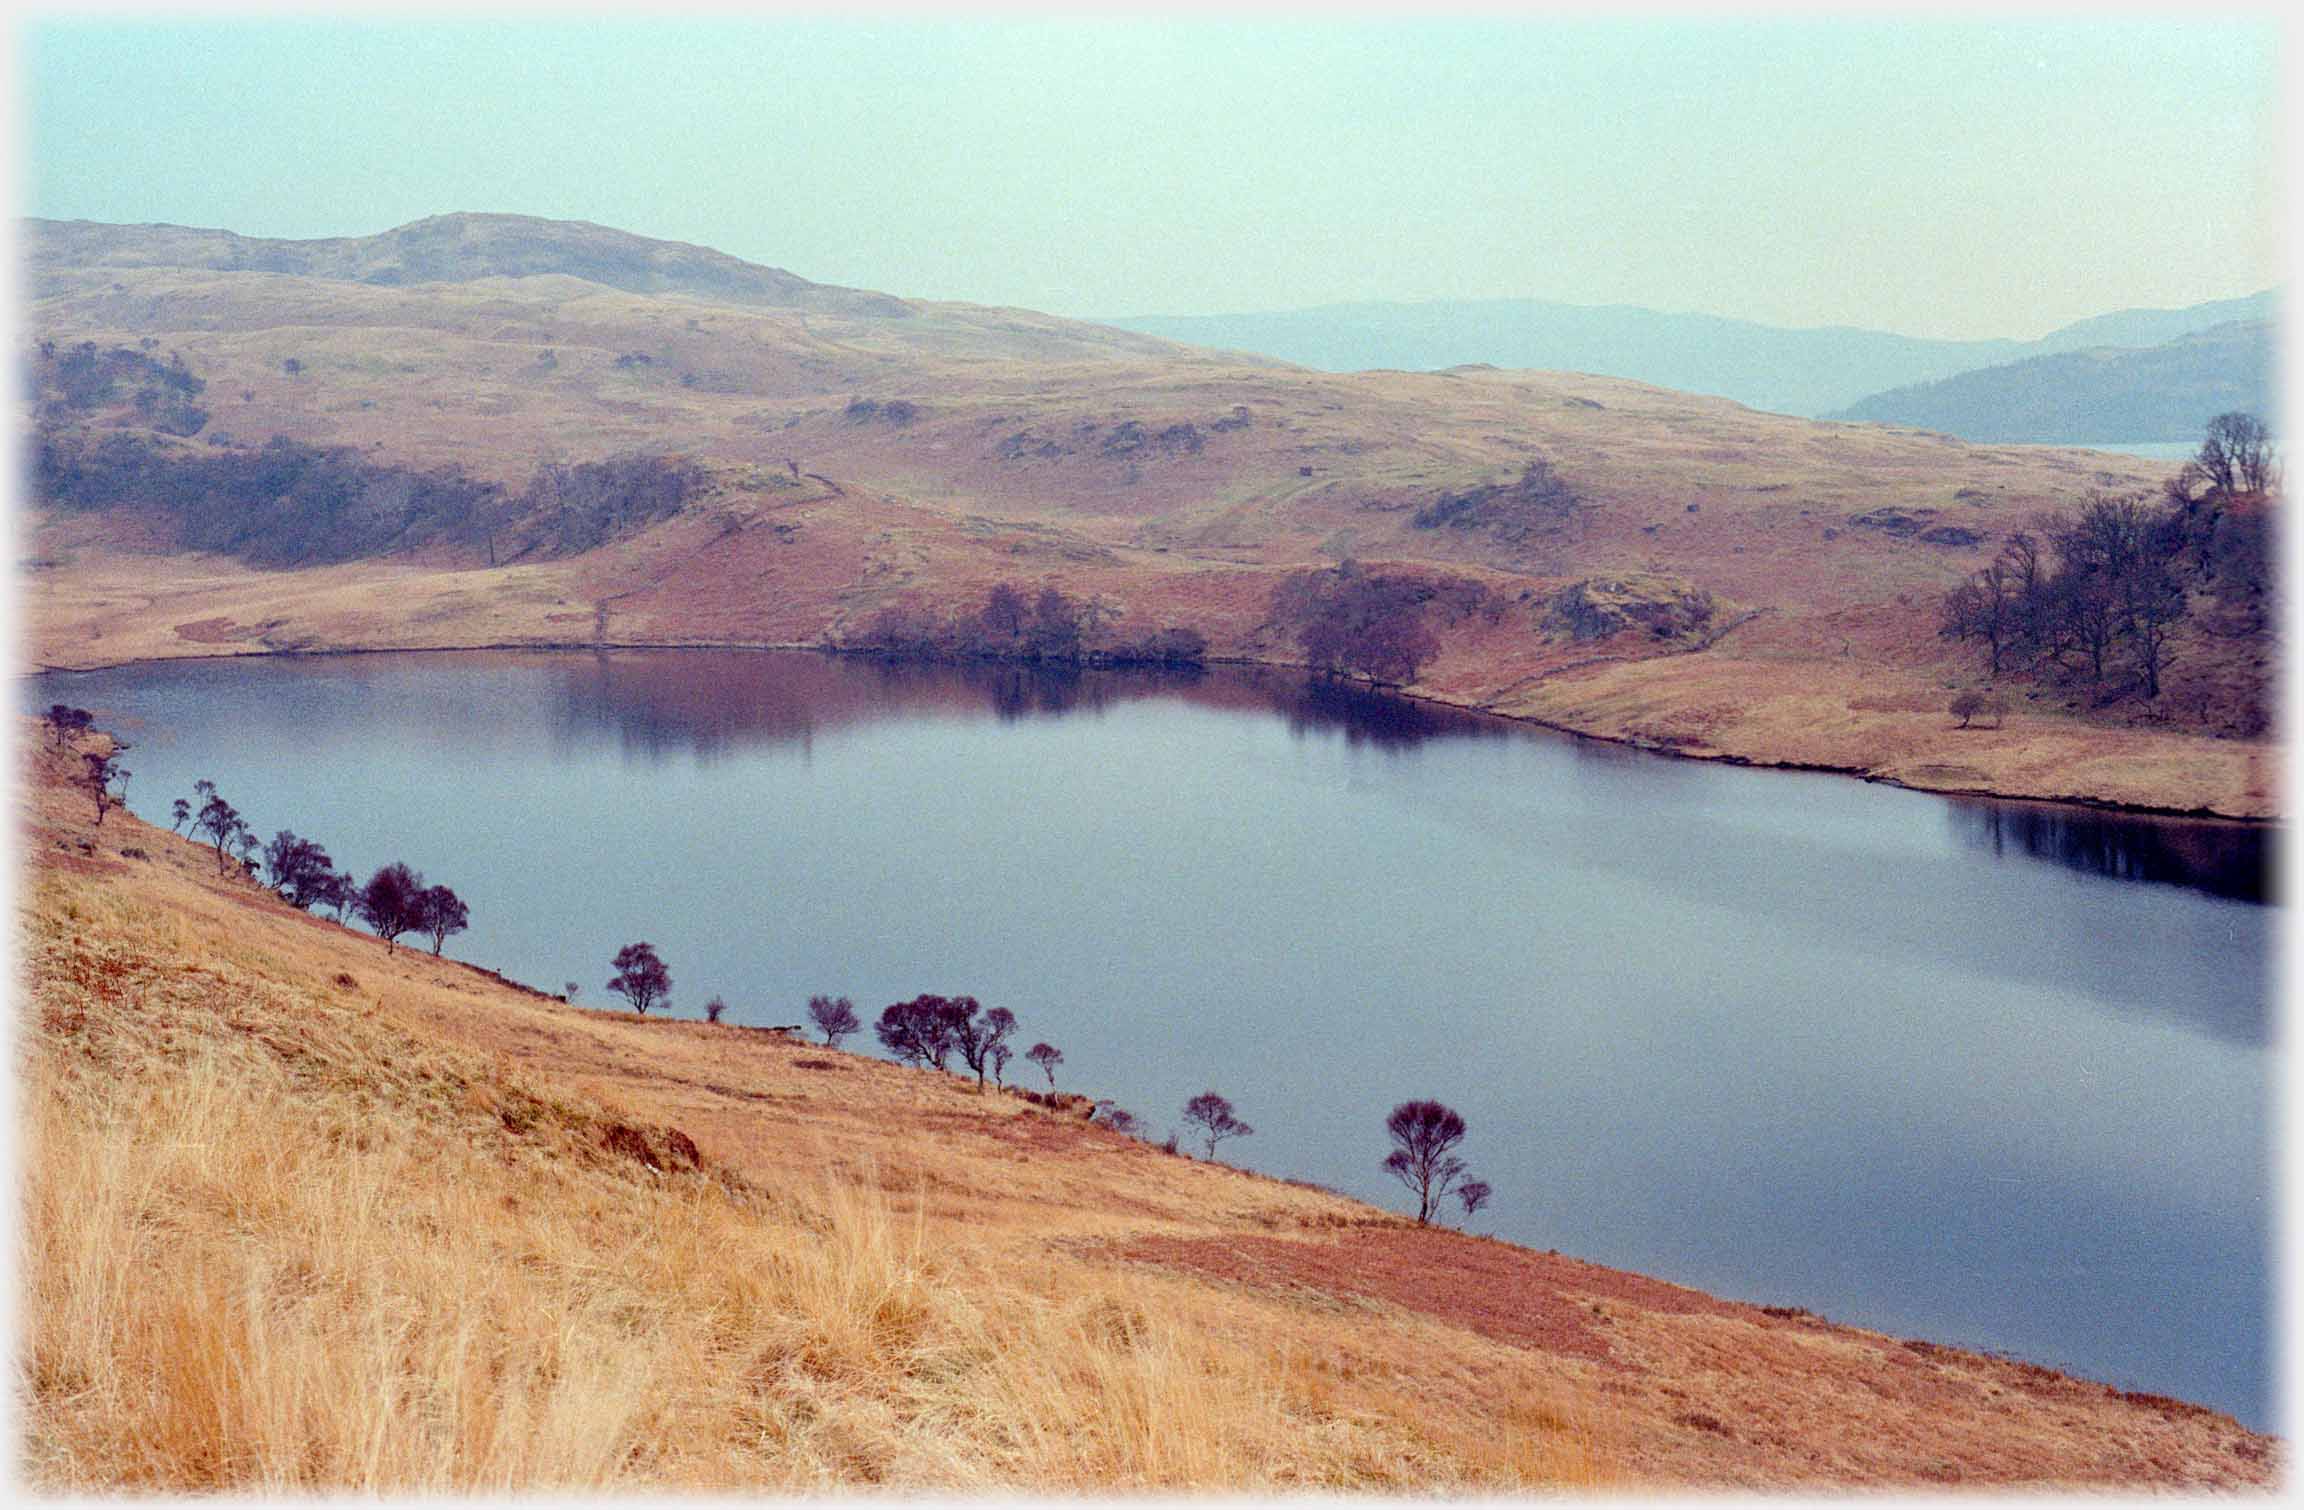 Dead flat loch with isolated trees around it.